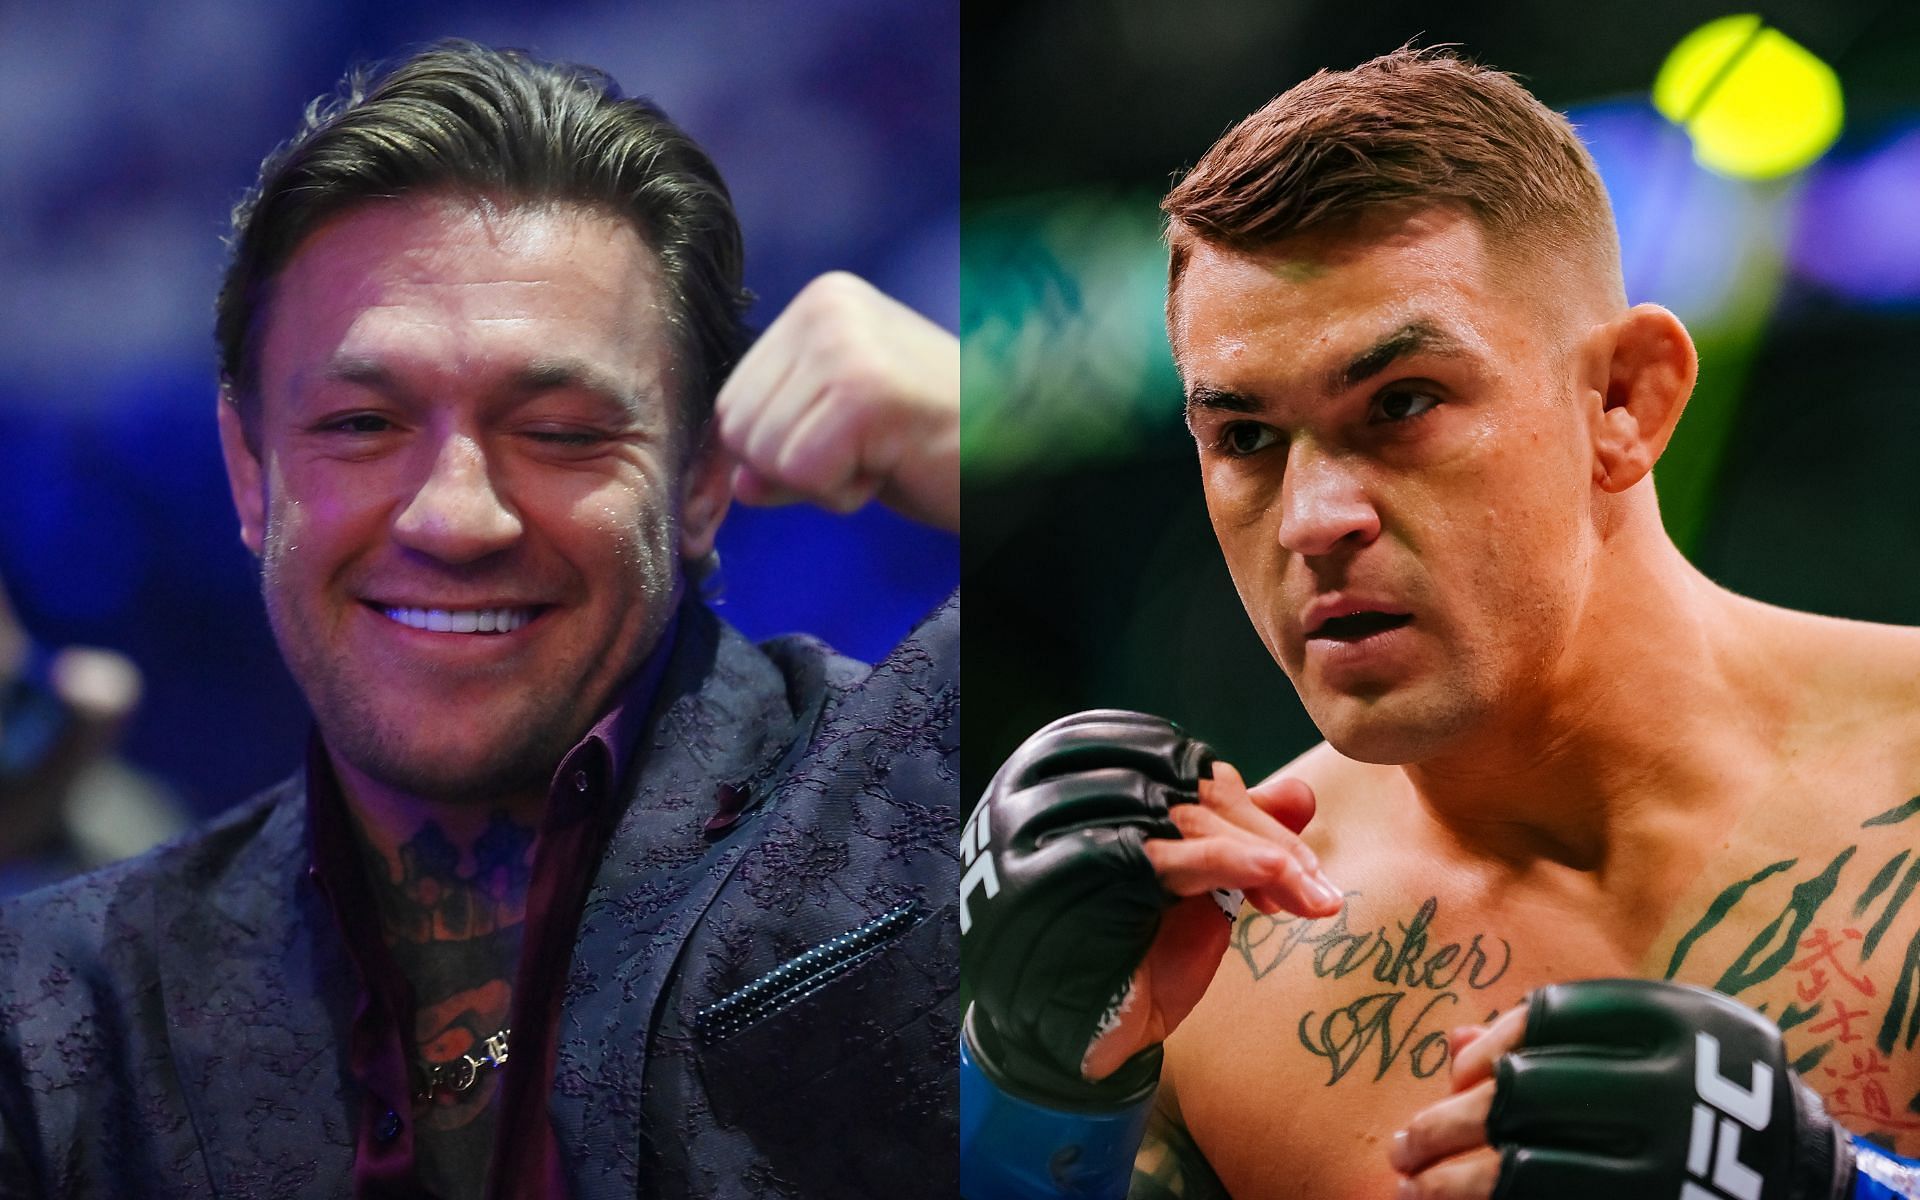 Conor McGregor (left) has directed extremely personal jabs at Dustin Poirier (right) over the course of their long and storied rivalry [Images courtesy: Getty Images]